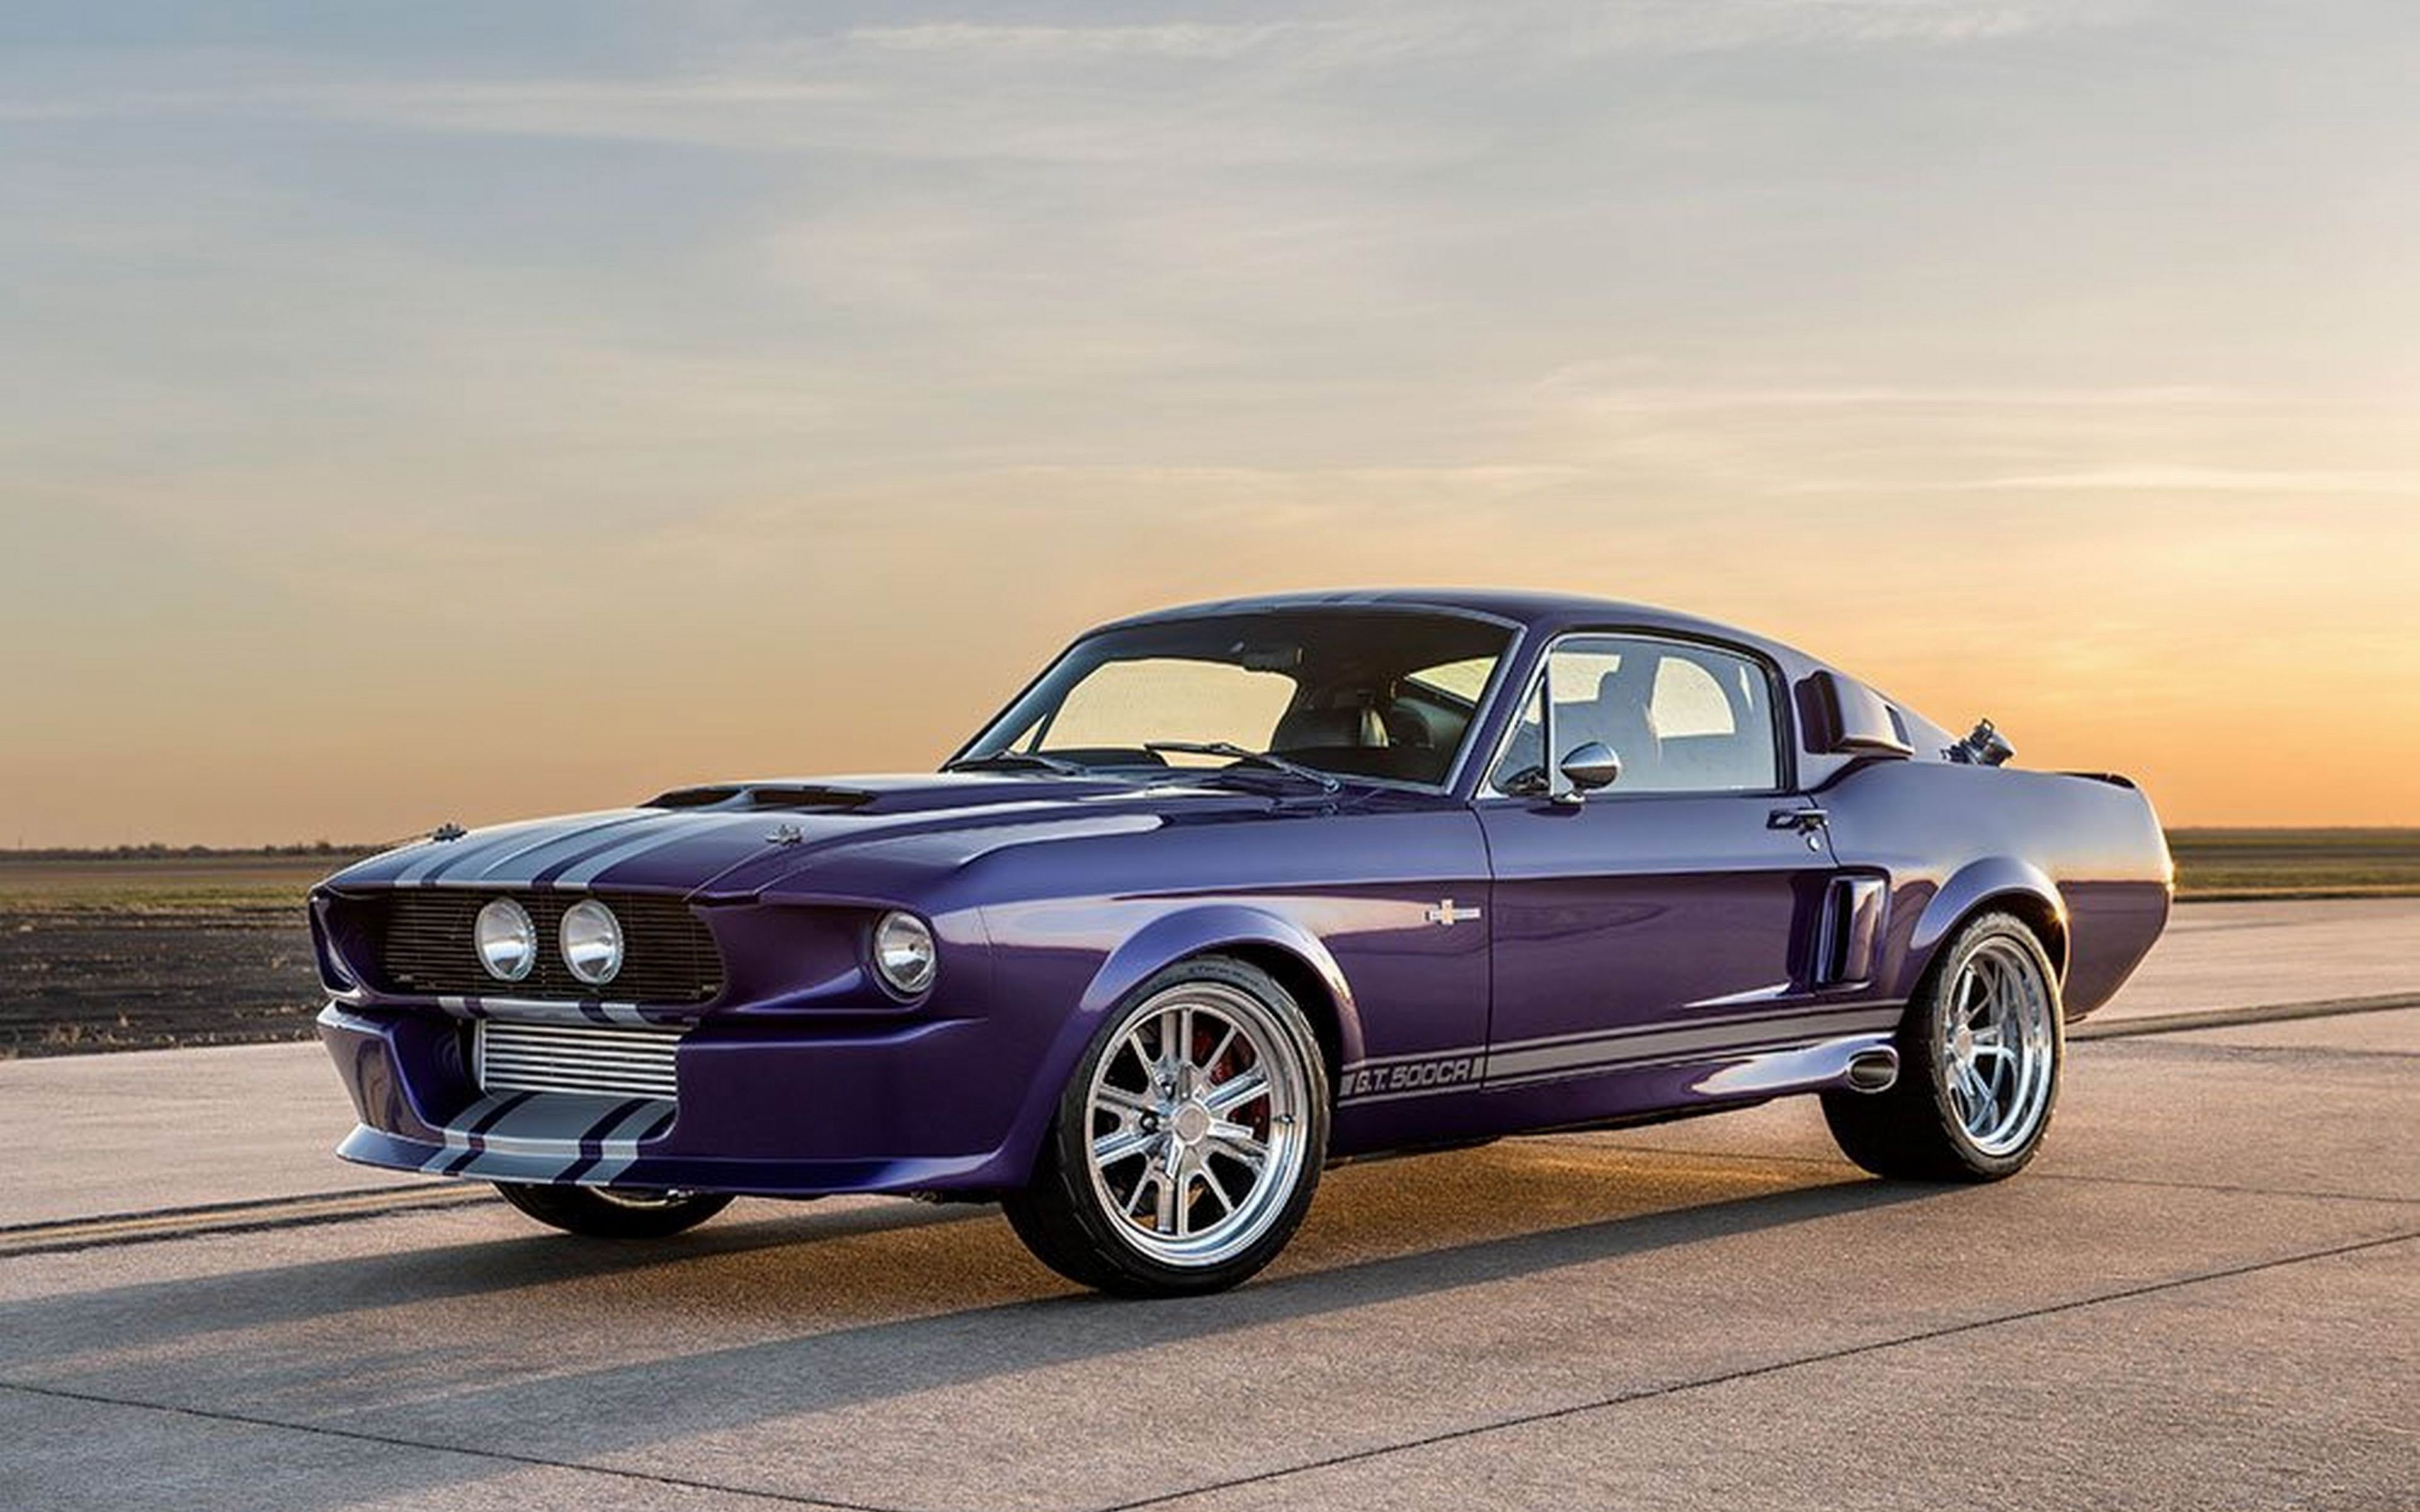 Download Violet, muscle car, Ford Mustang Shelby GT500 wallpaper, 3840x 4K Ultra HD 16: Widescreen